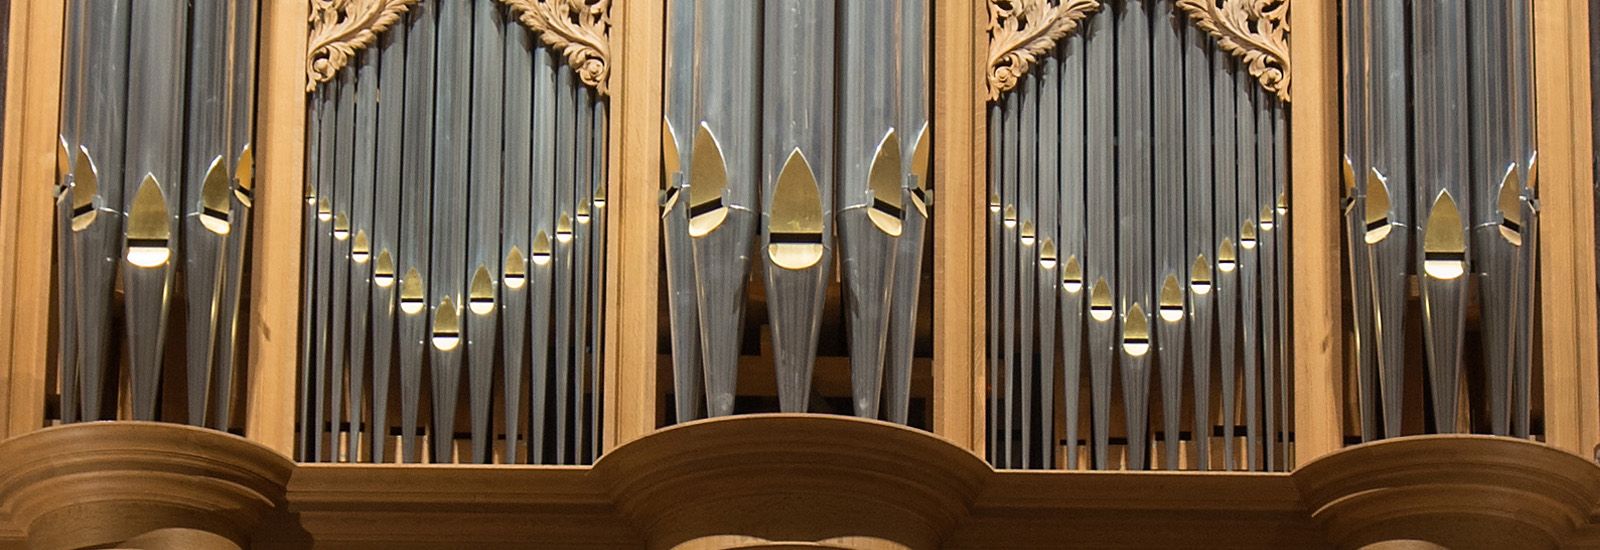 The pipes on an organ.